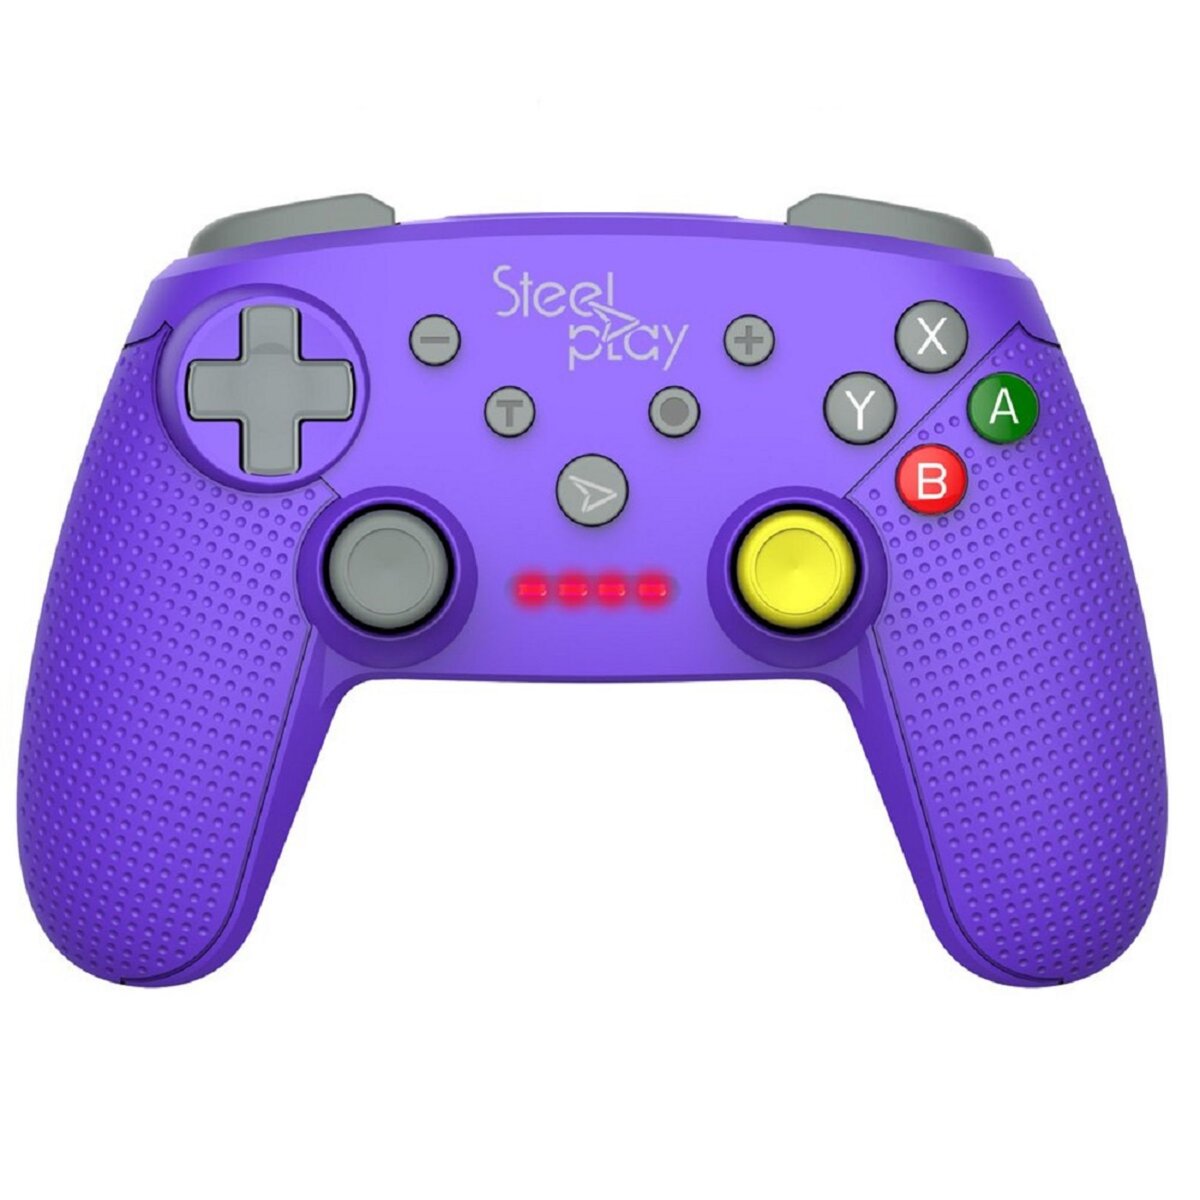 MANETTE FILAIRE SWITCH